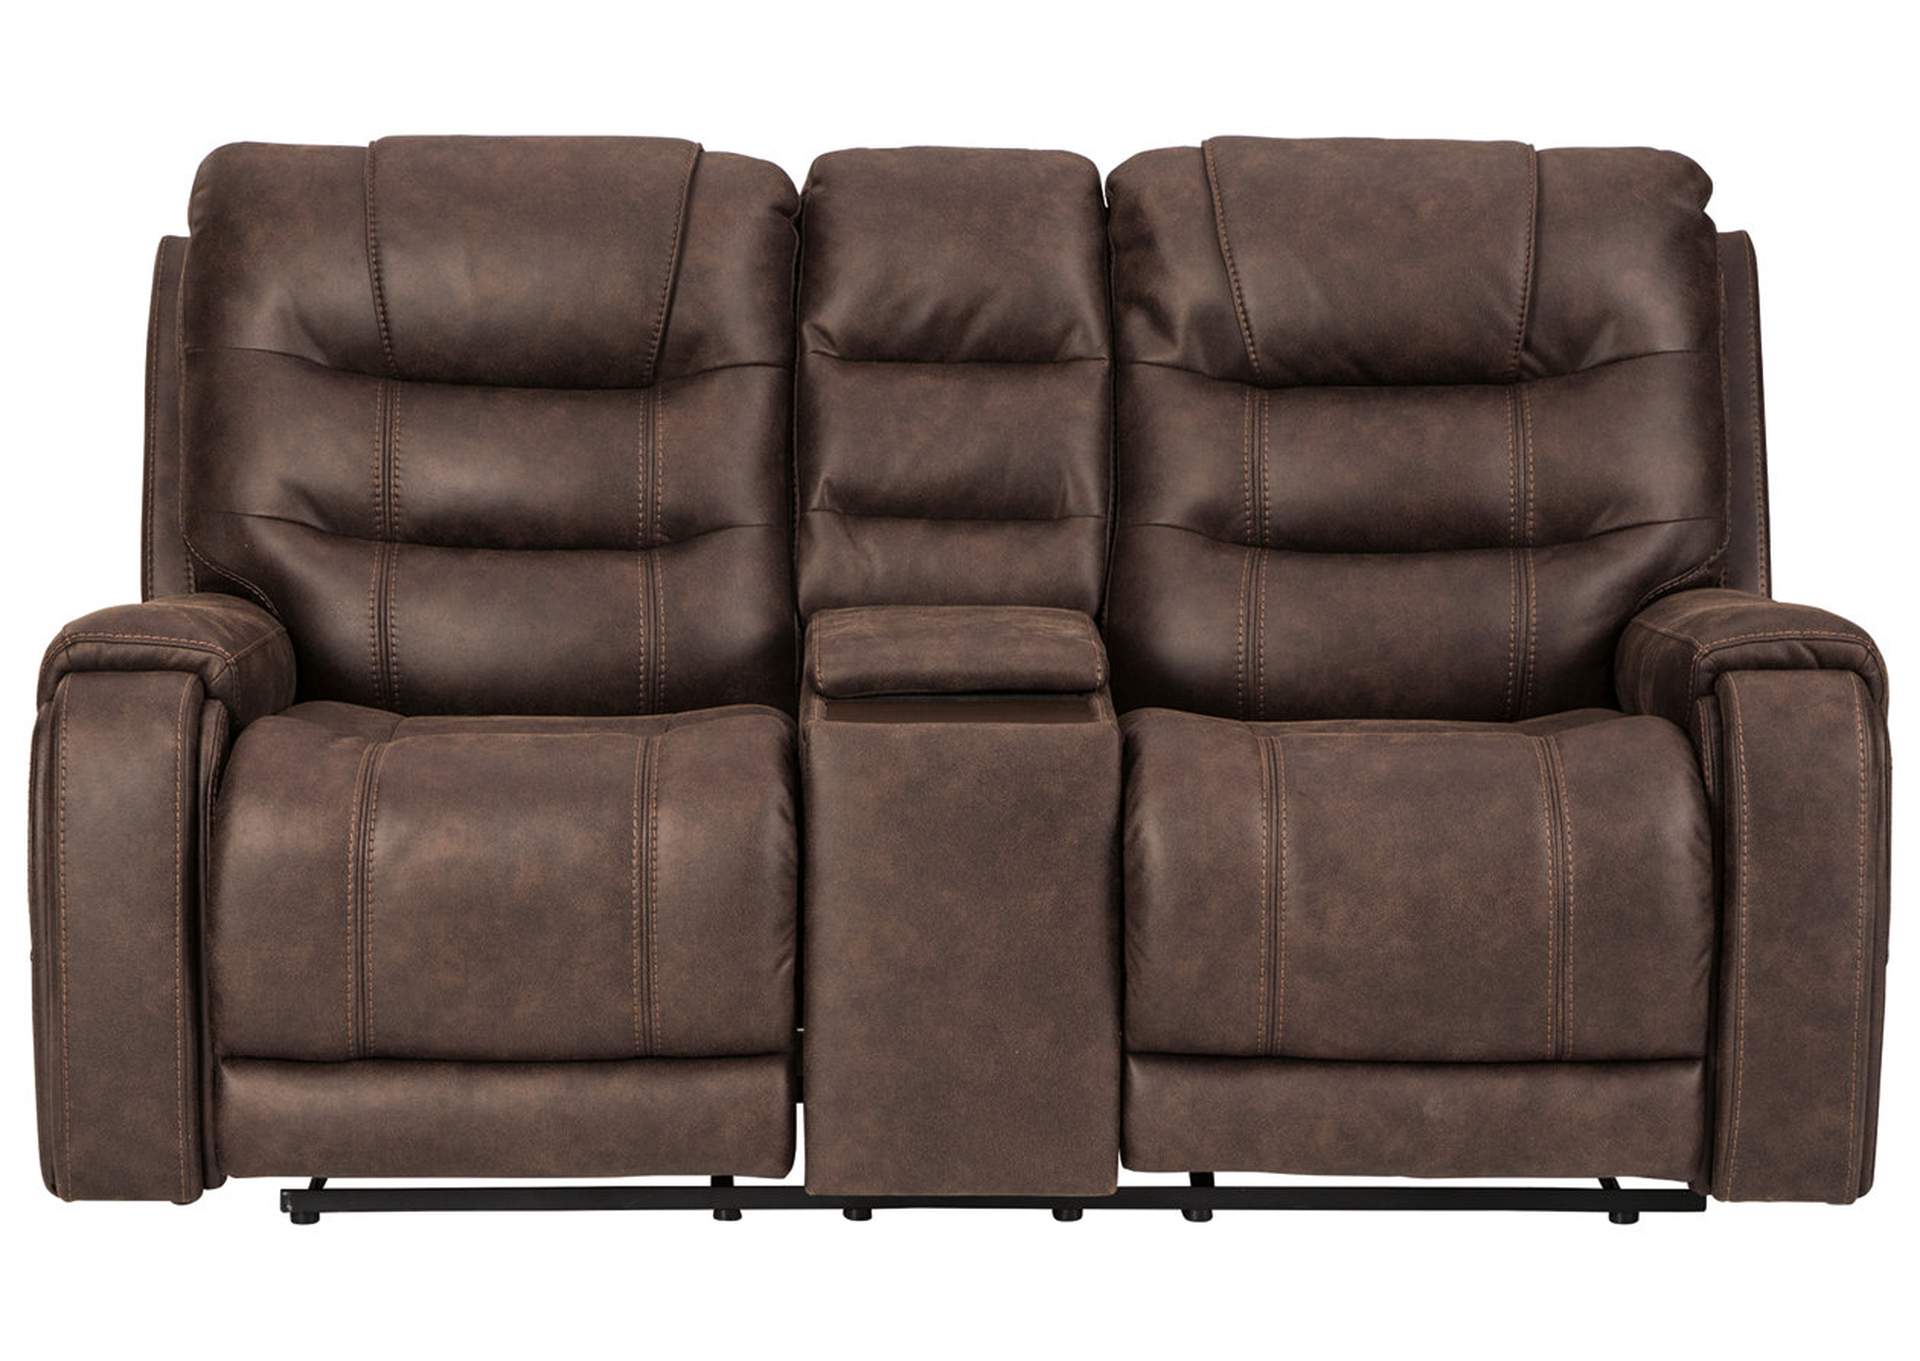 Yacolt Power Reclining Loveseat with Console,Signature Design By Ashley